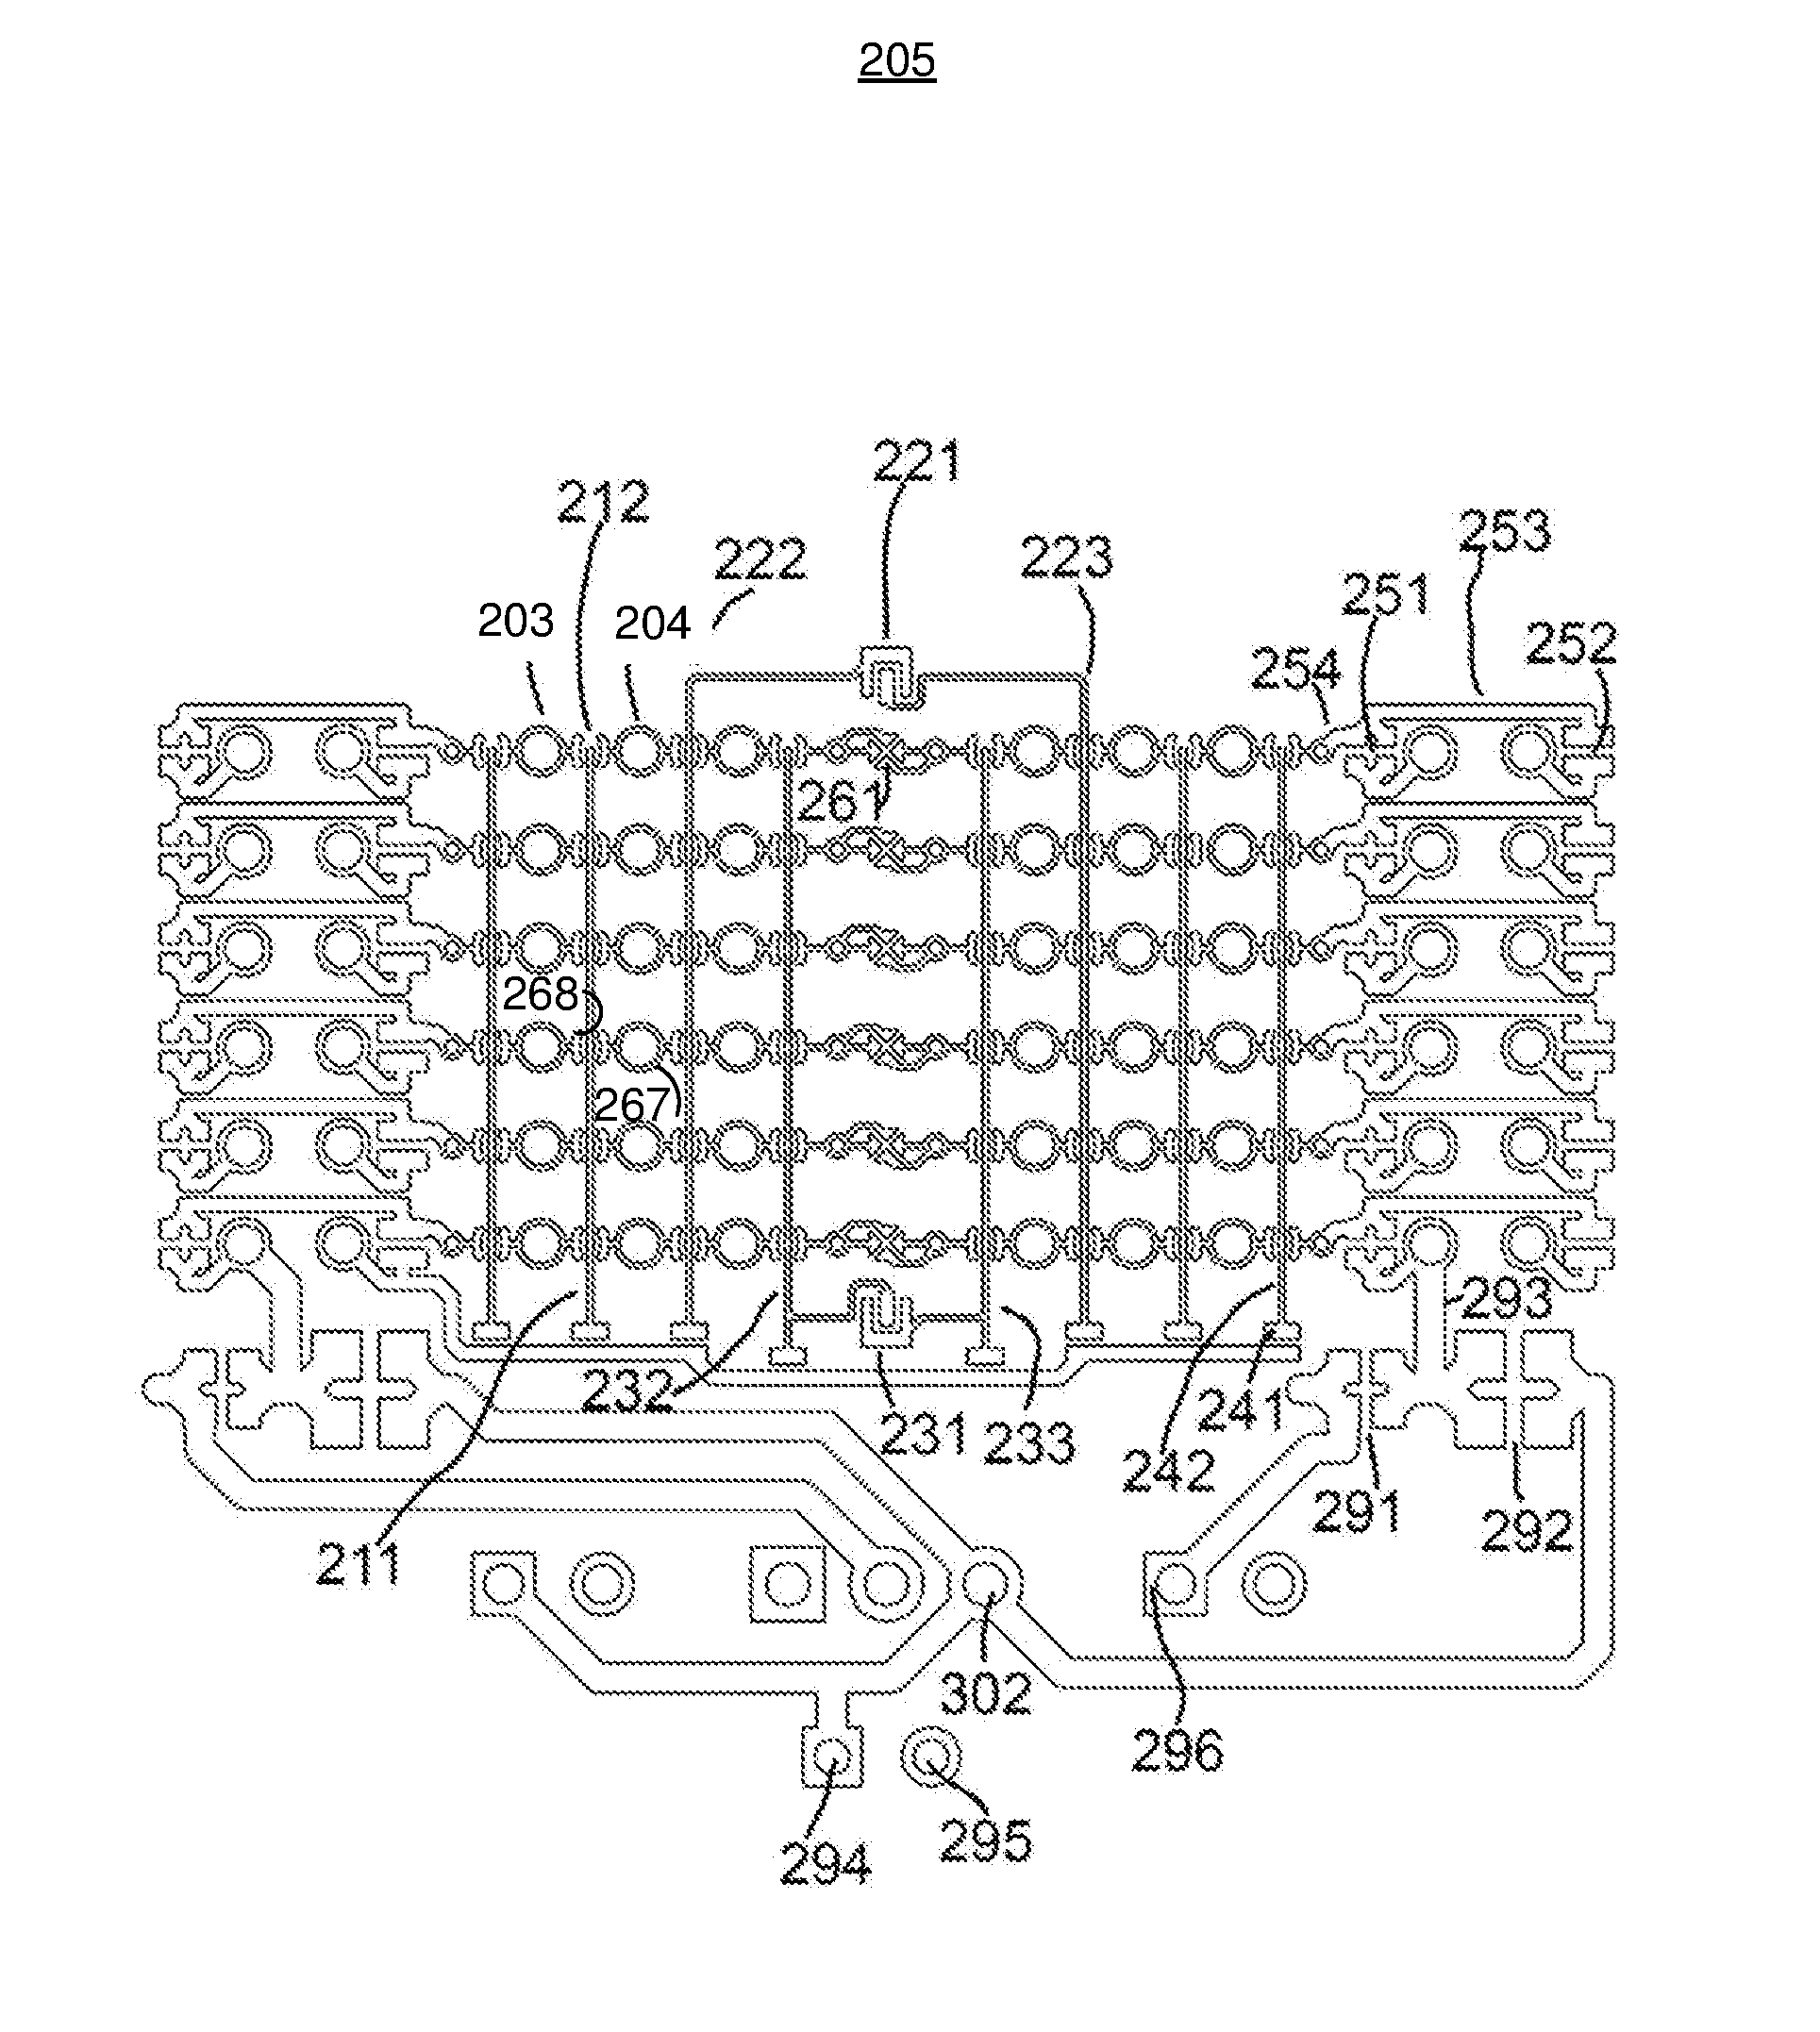 Systems and methods for breadboard sytle printed circuit board